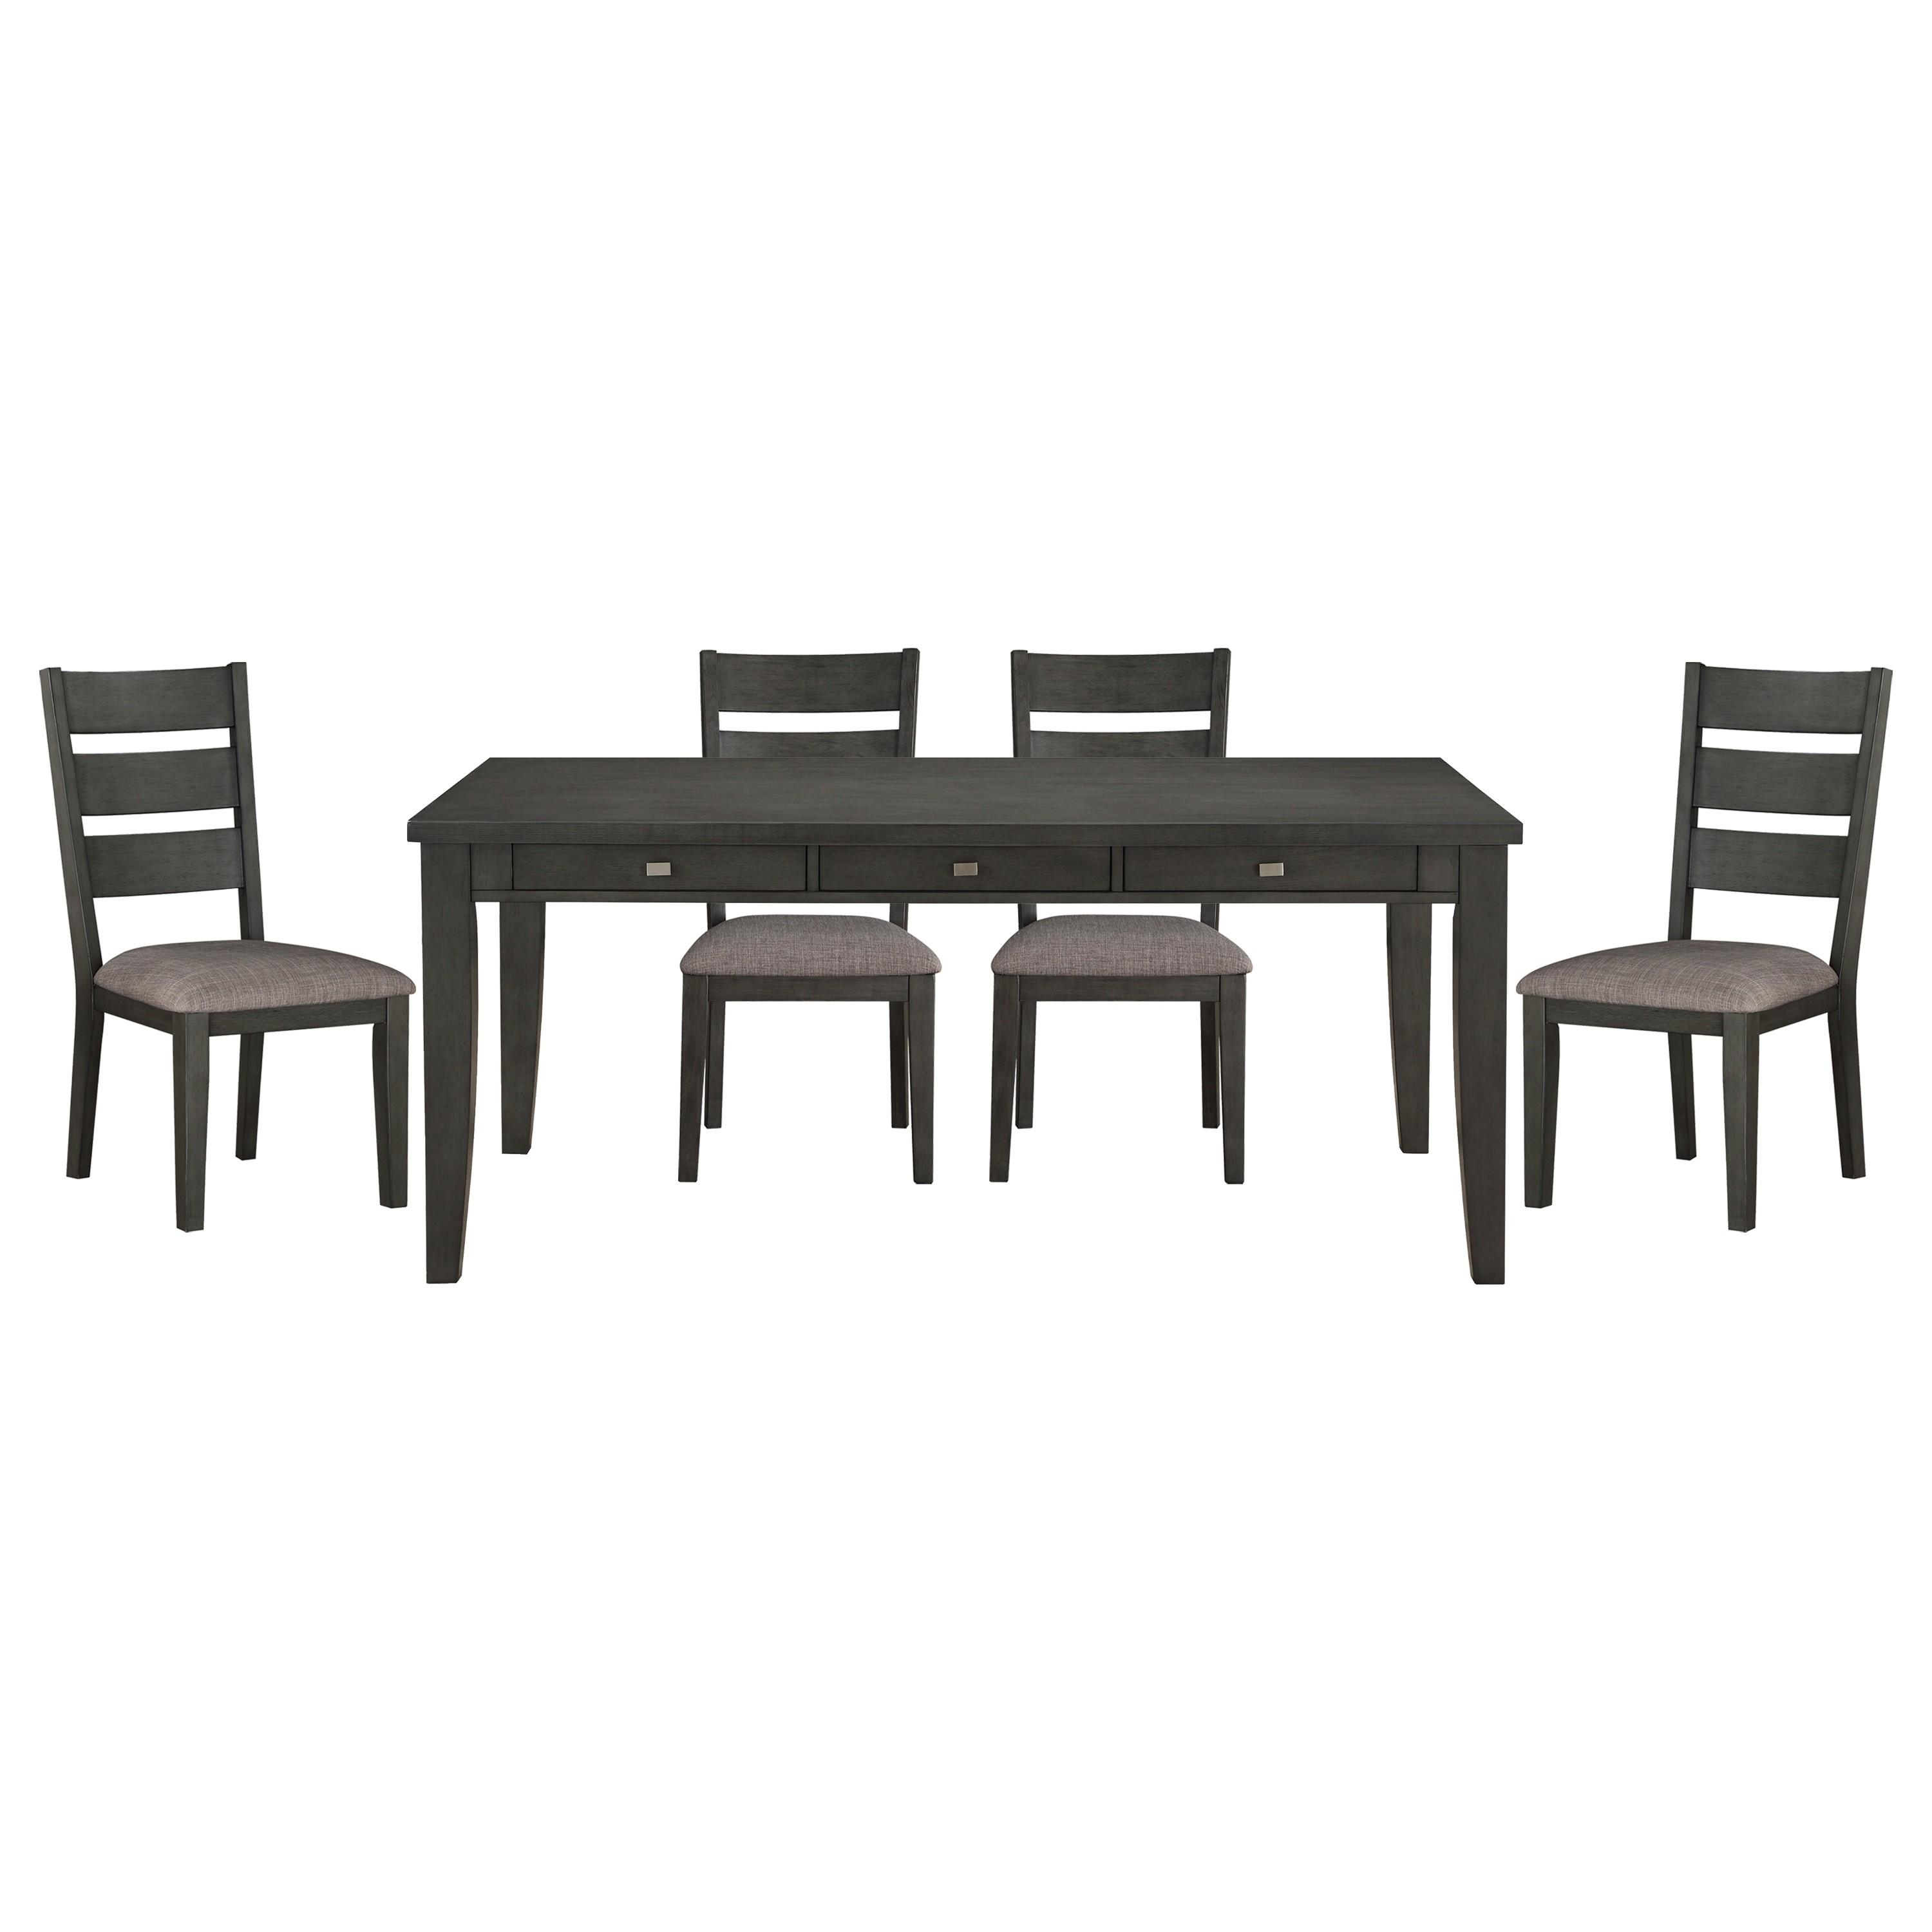 Transitional Dining Room Set 5674-72*5PC Baresford 5674-72*5PC in Gray Polyester